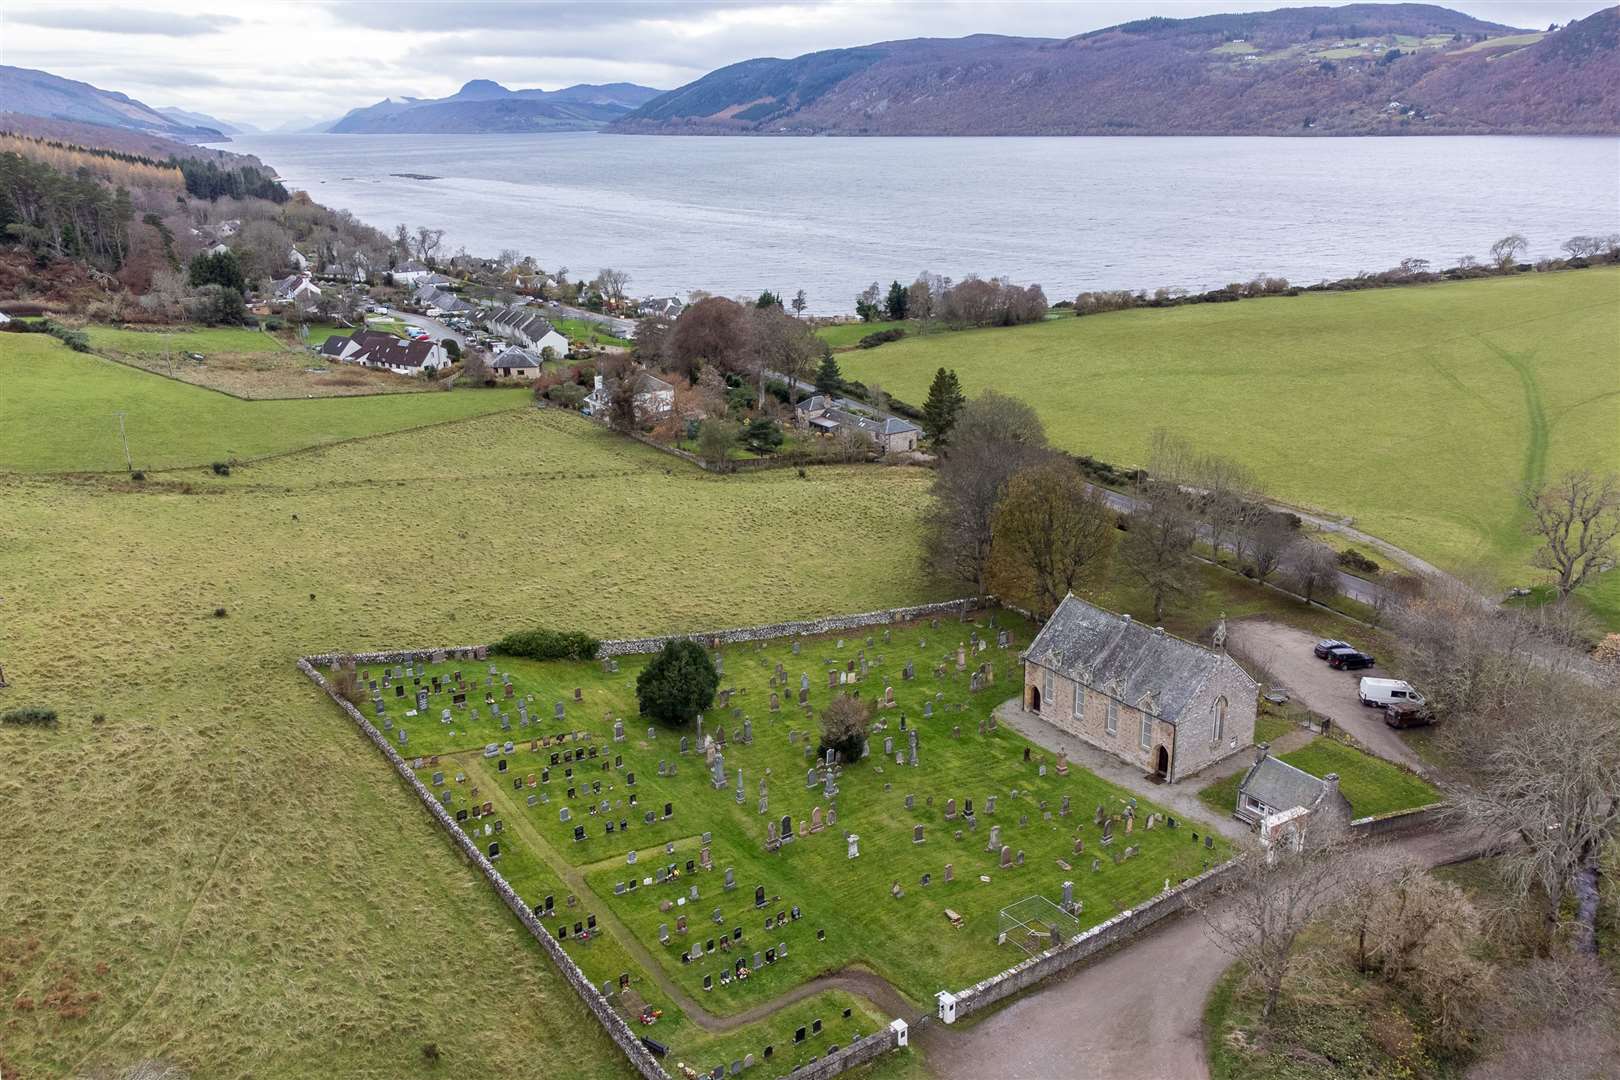 Dores Church in its iconic Loch Ness setting taken by Reuben Tabner for Church of Scotland.